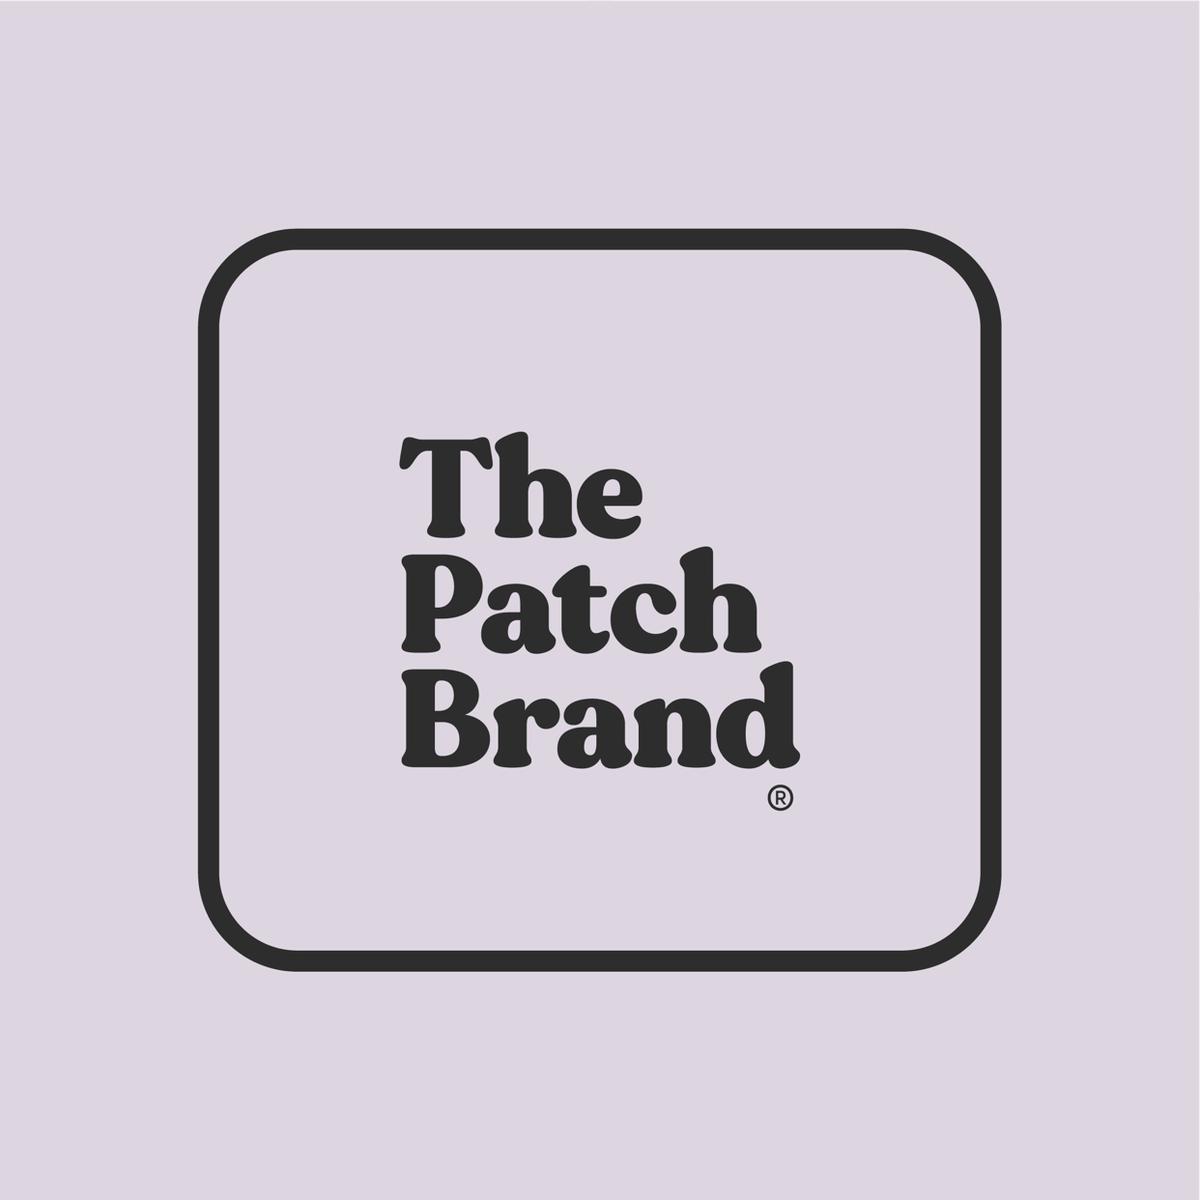 The Patch Brand's images